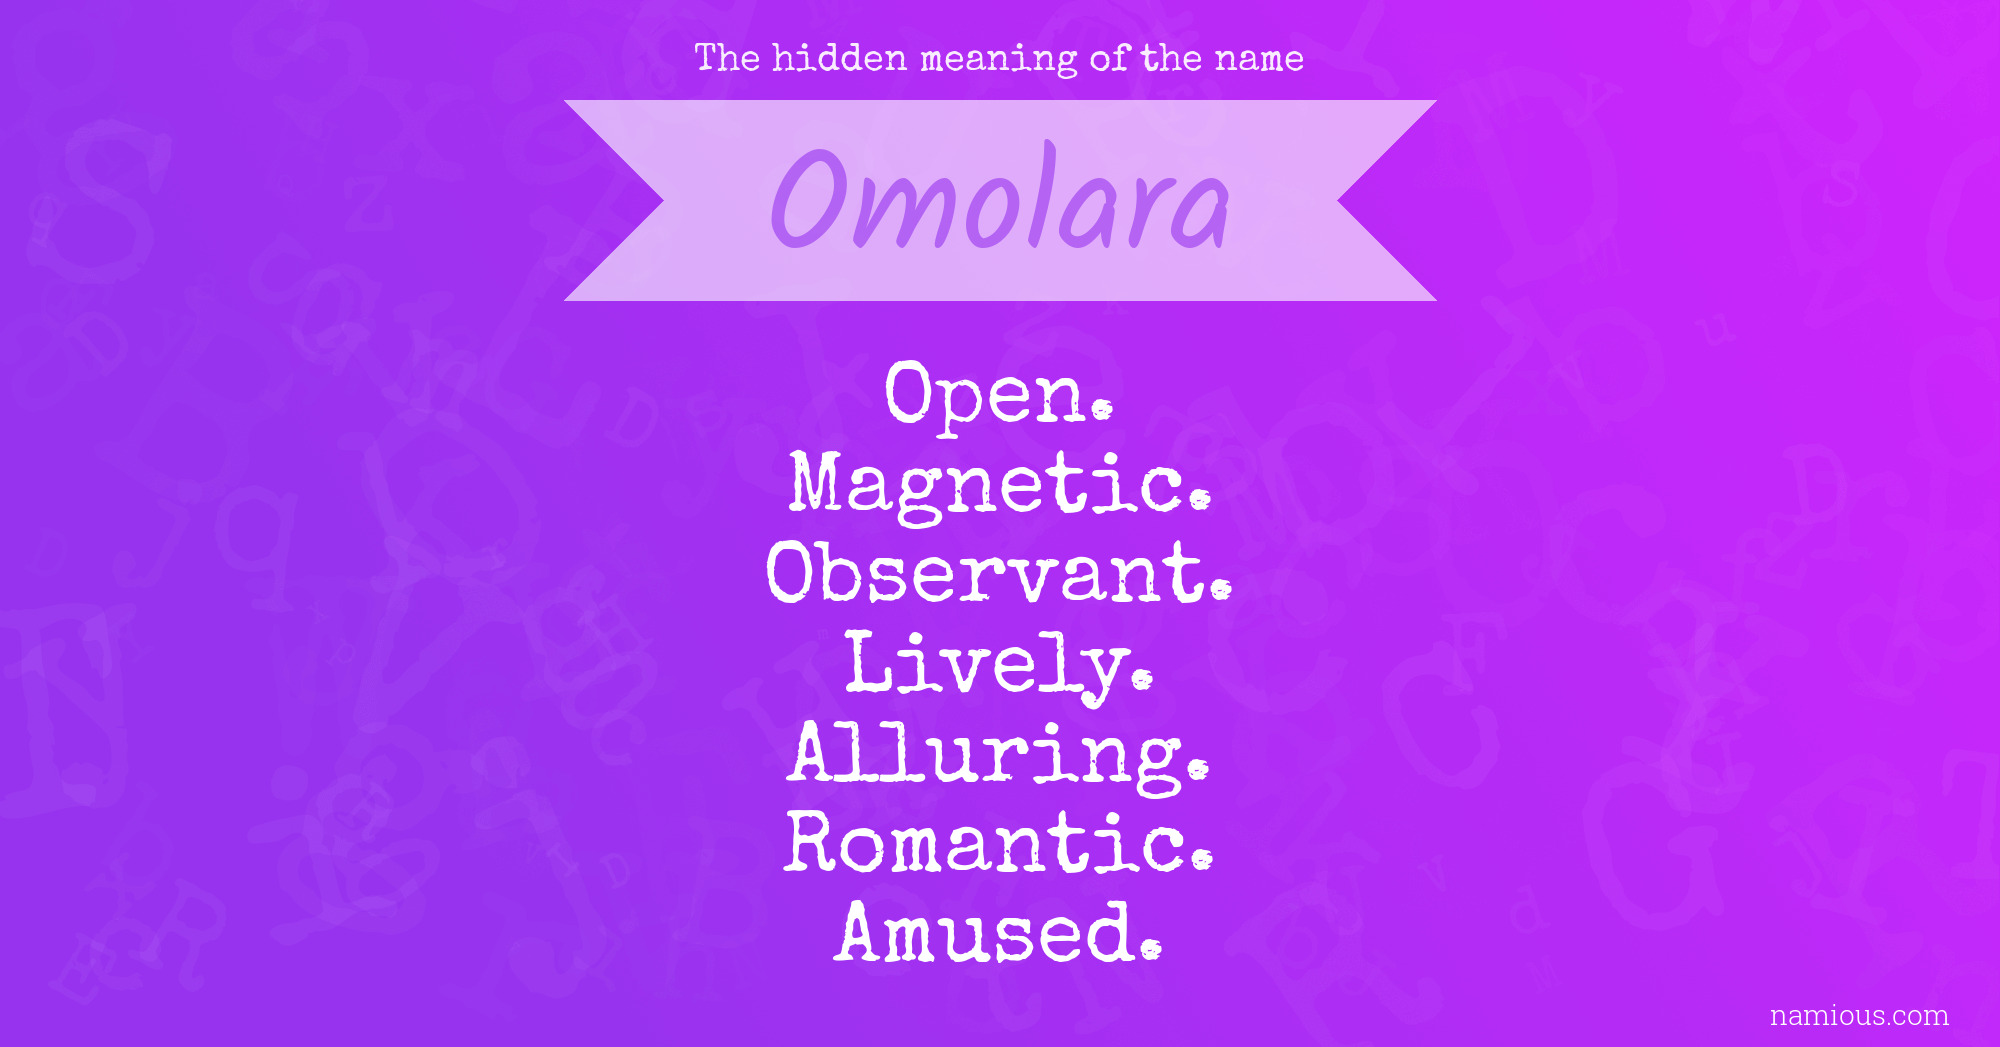 The hidden meaning of the name Omolara